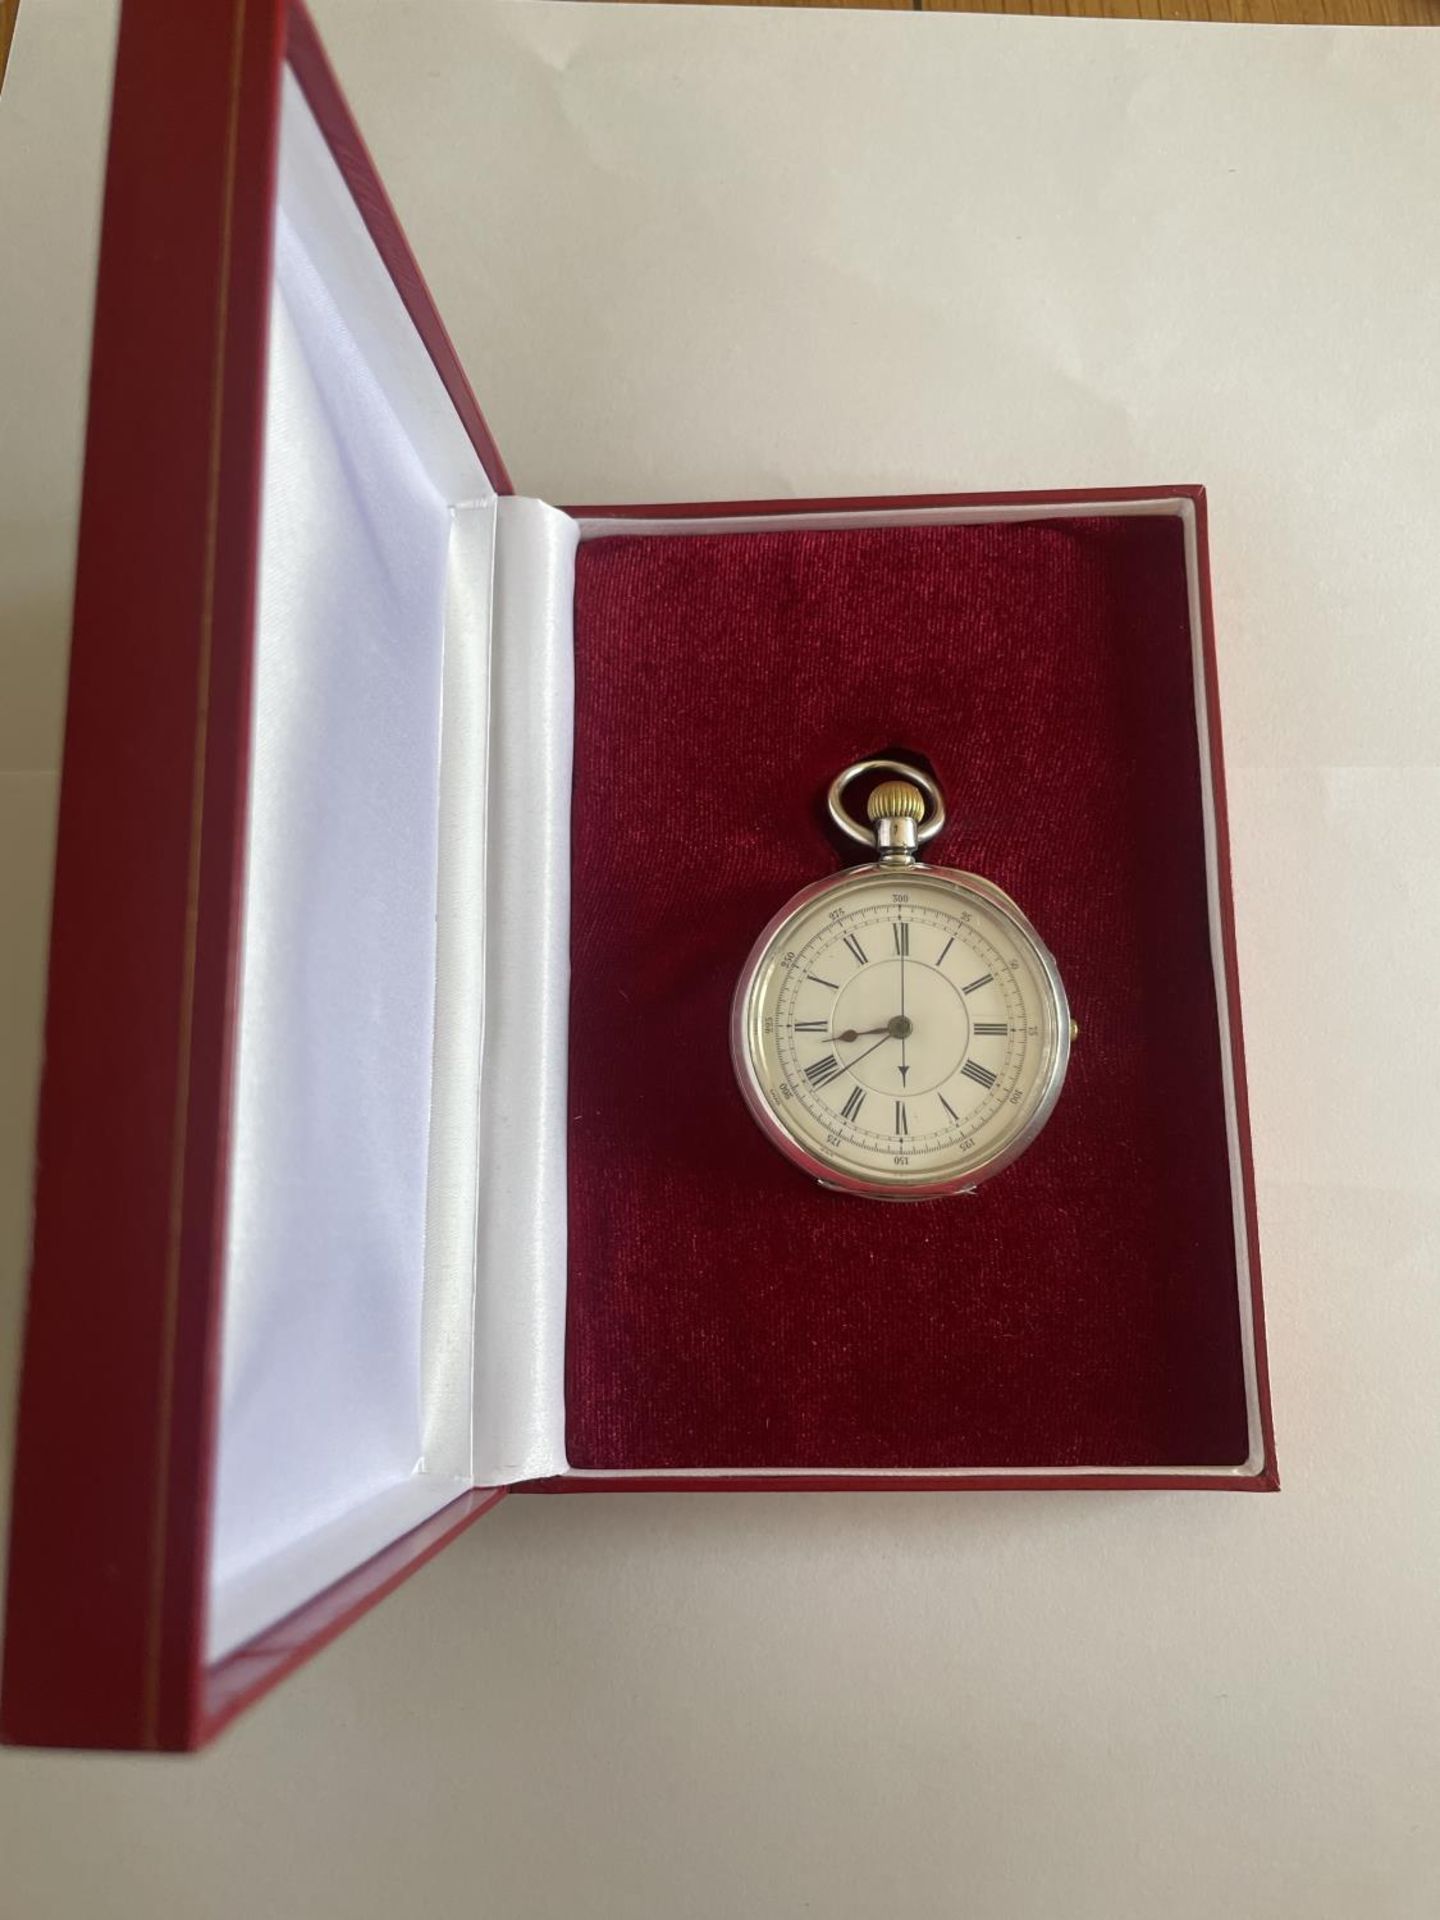 A RARE SILVER CHRONOGRAPH POCKET WATCH WITH WHITE FACE AND ROMAN NUMERALS IN ORIGINAL PRESENTATION